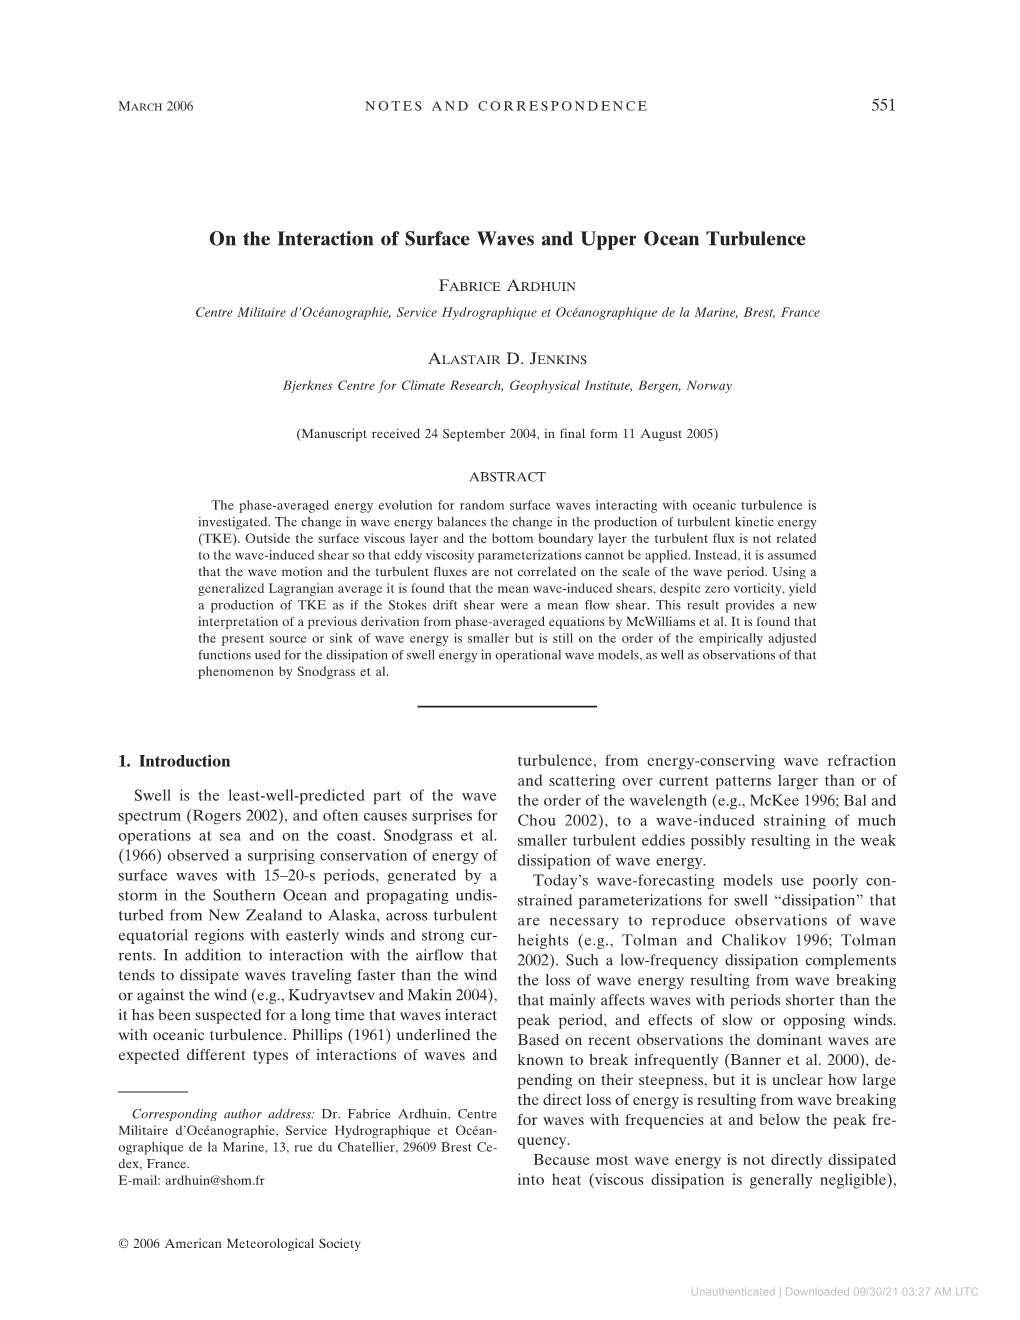 On the Interaction of Surface Waves and Upper Ocean Turbulence